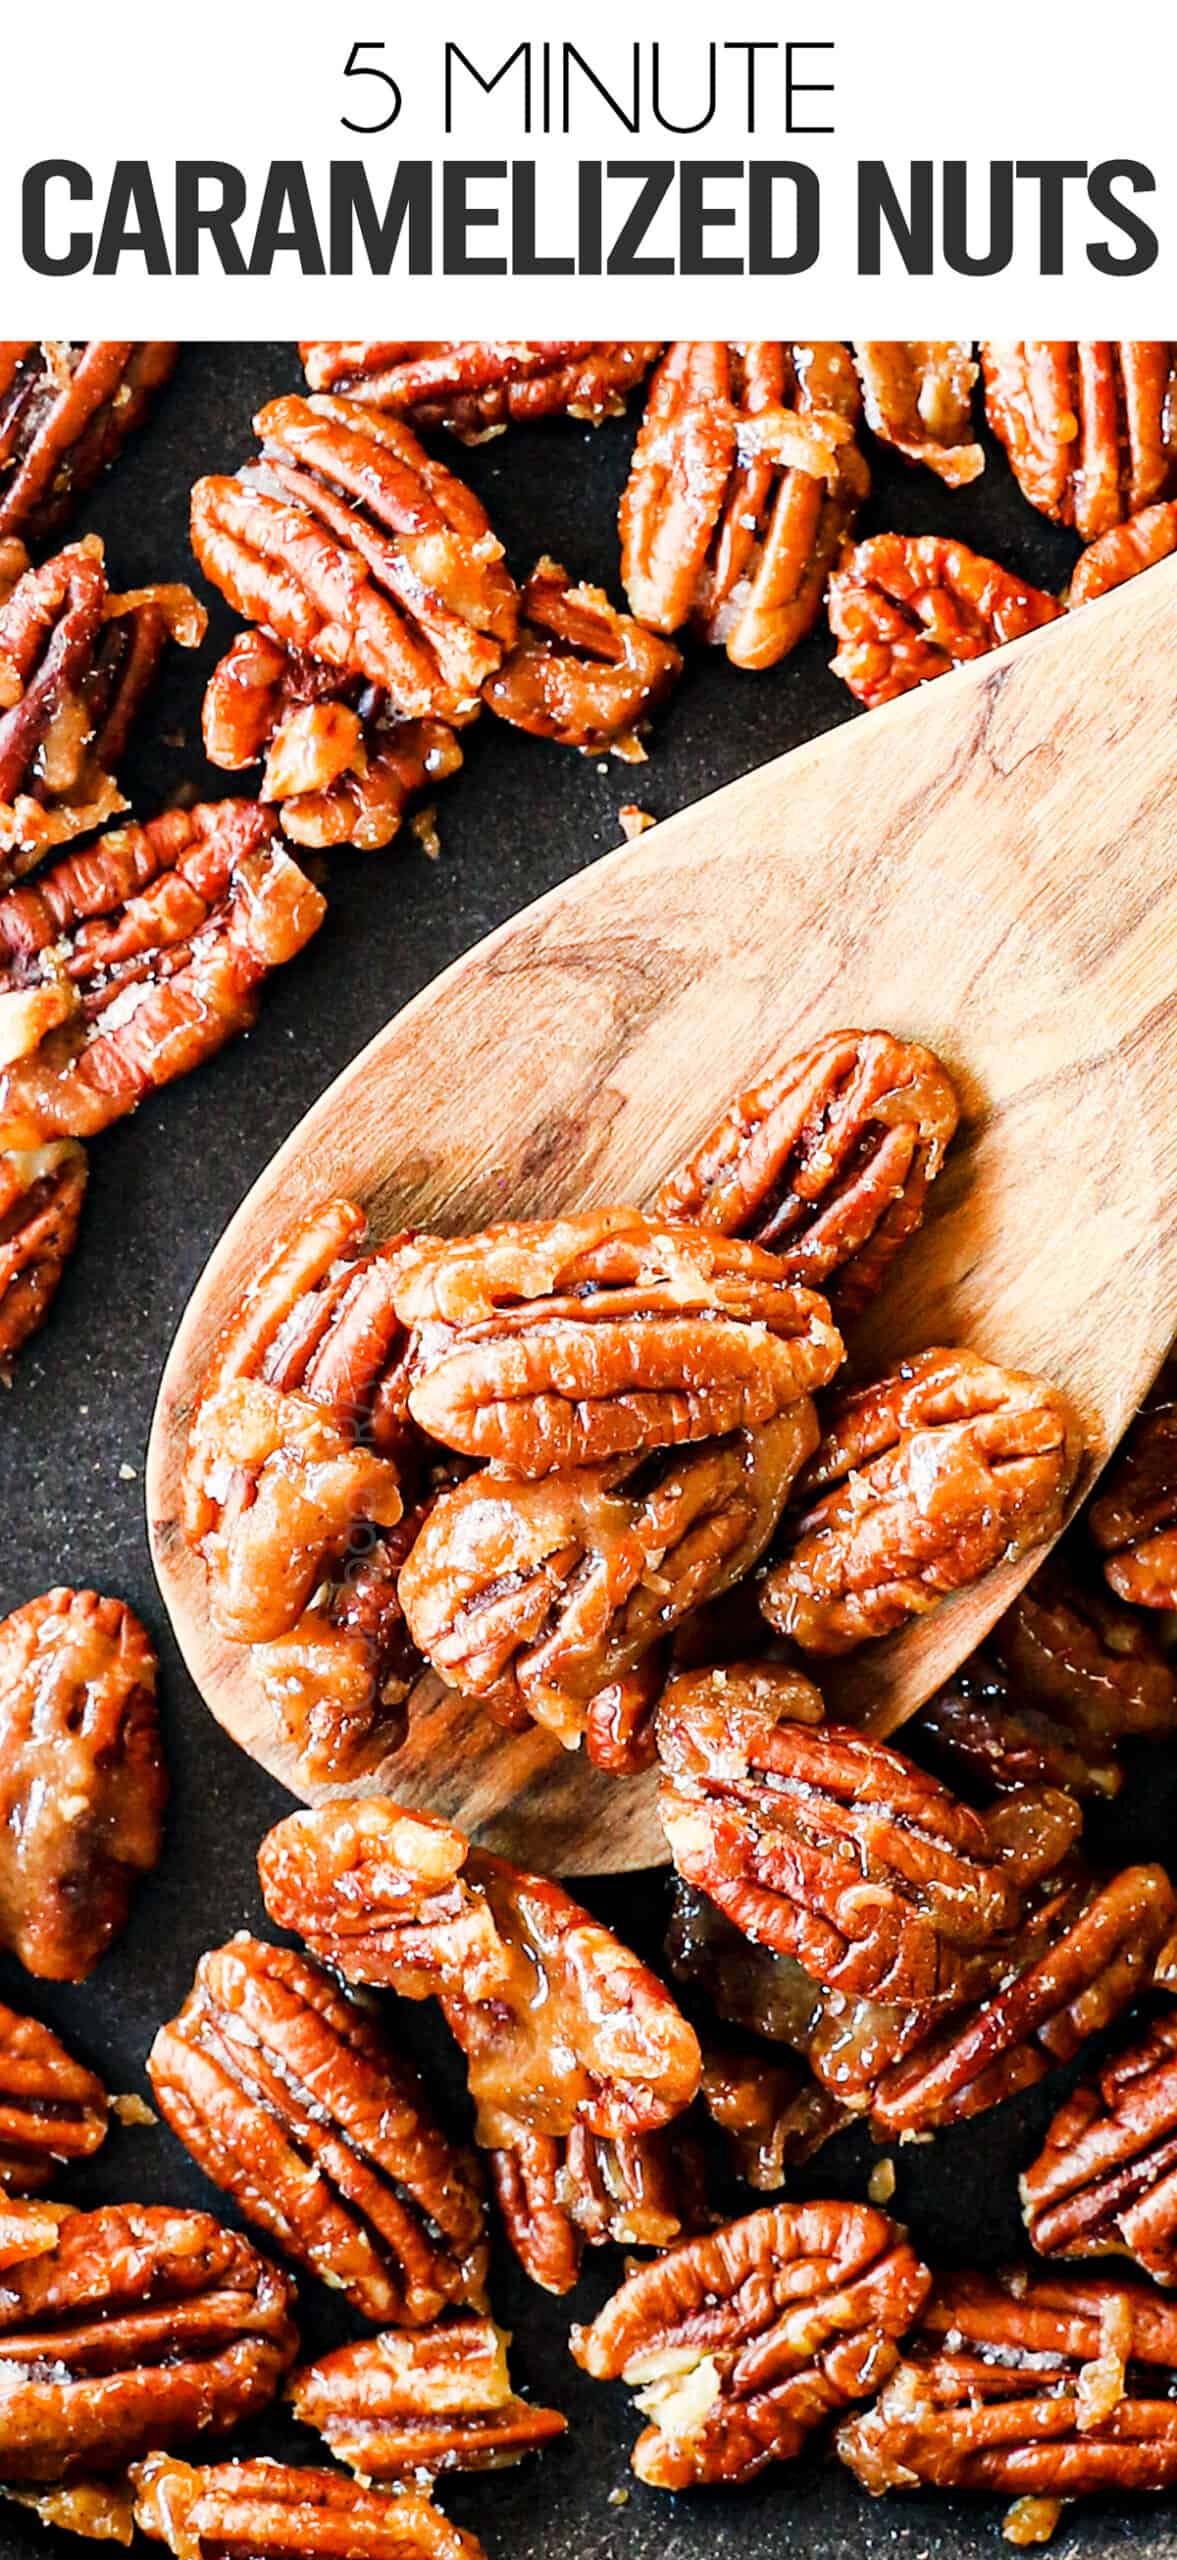 Caramelized nuts in a pan coated in butter and sugar